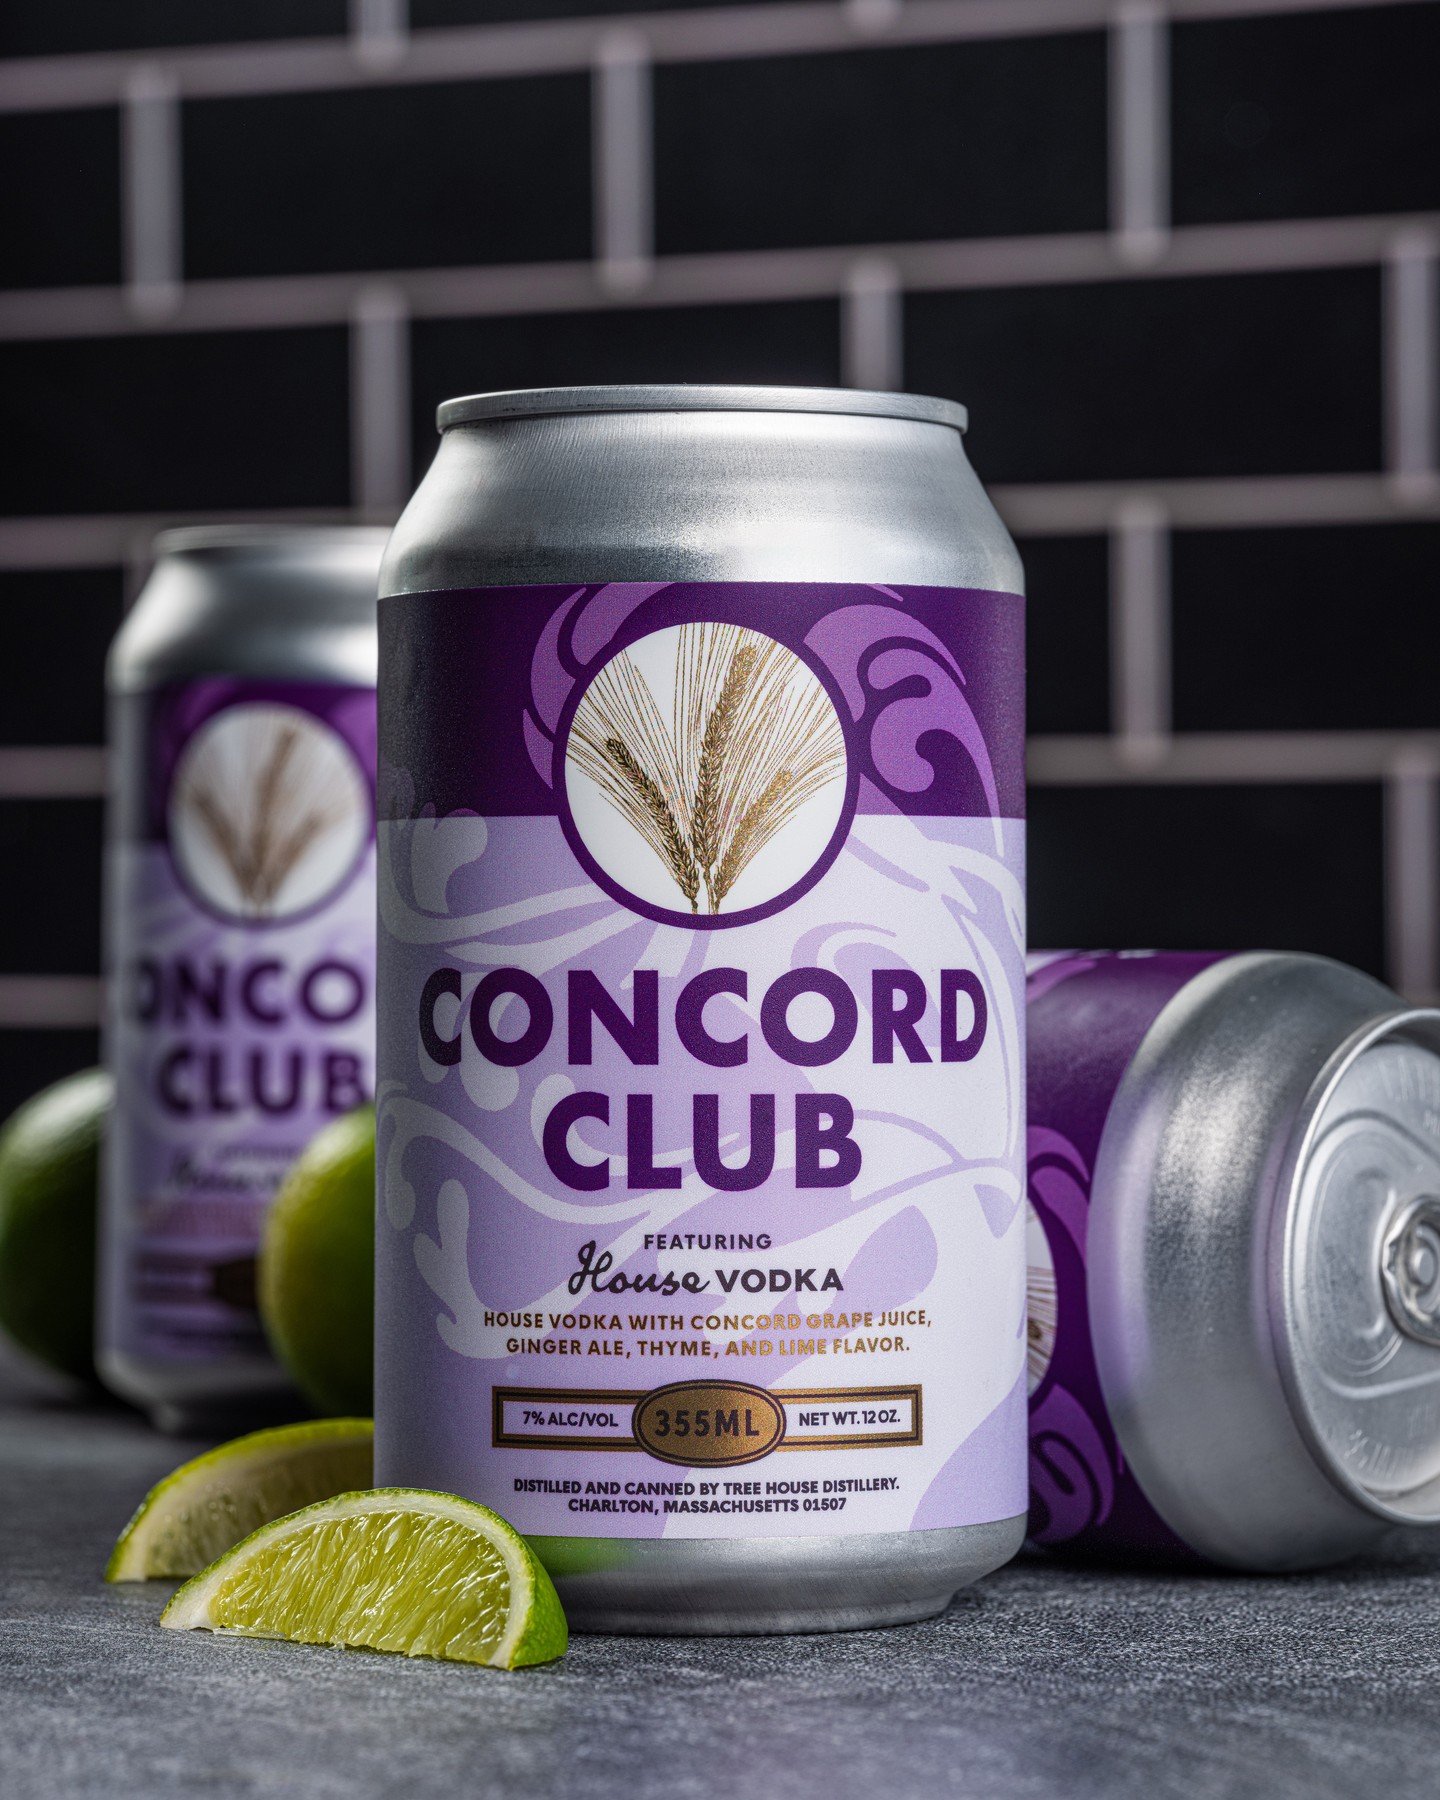 We&rsquo;re stocking up on one of your very favorite cocktails today:

Concord Club!

#productphotography #photography #craftdistillery #distillery #distilling #treehousebrewing #fujifilm #gfx100II @fujifilmx_us @profoto